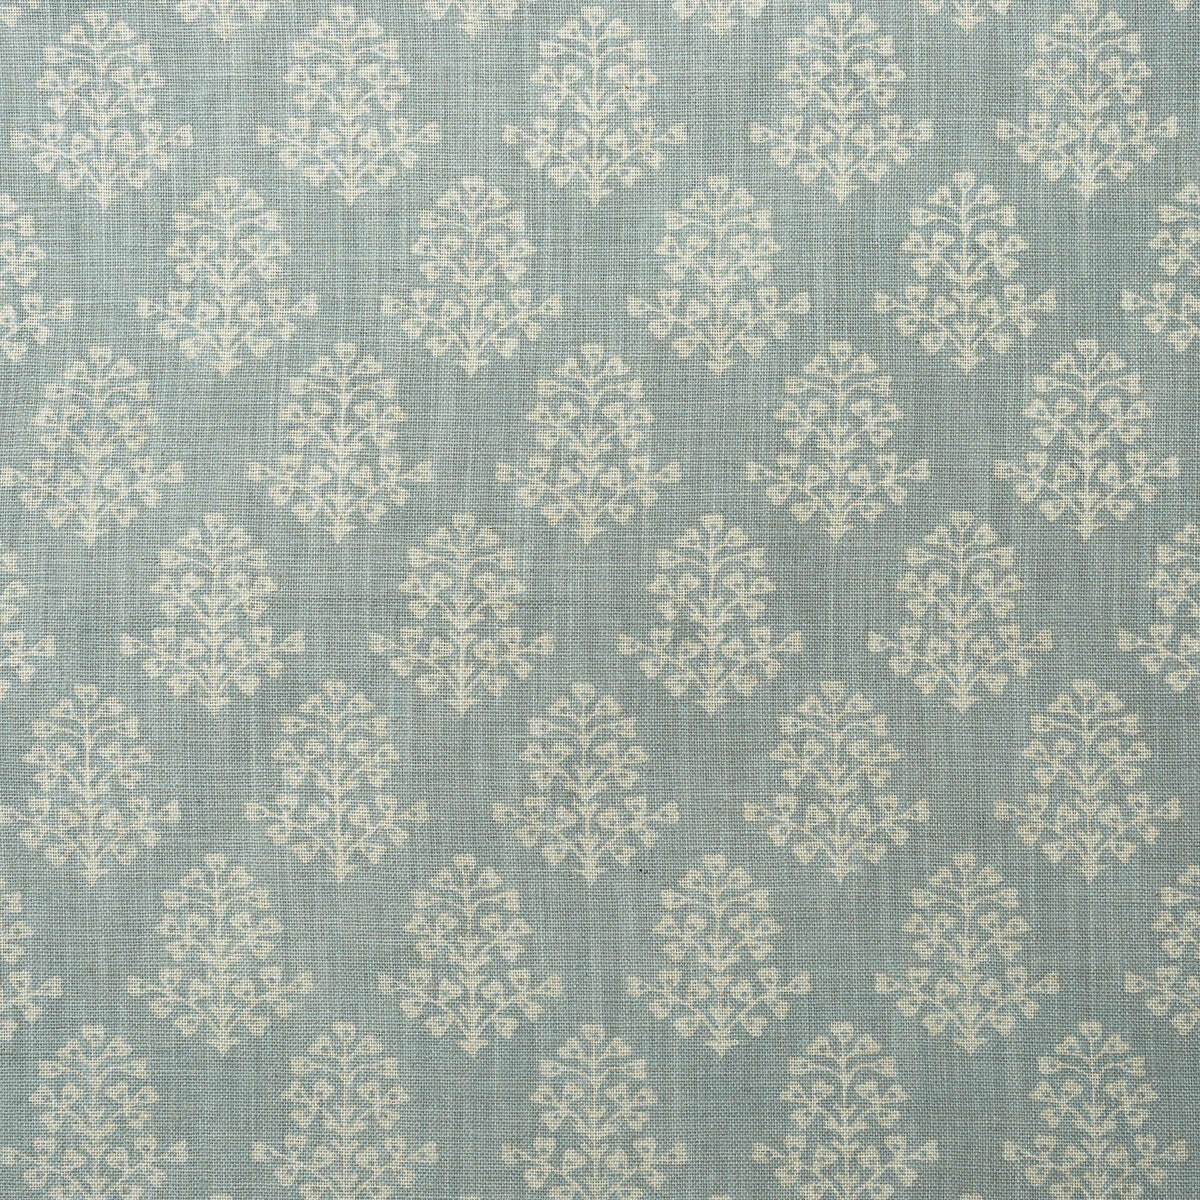 Sprig fabric in sky color - pattern AM100384.15.0 - by Kravet Couture in the Andrew Martin Garden Path collection